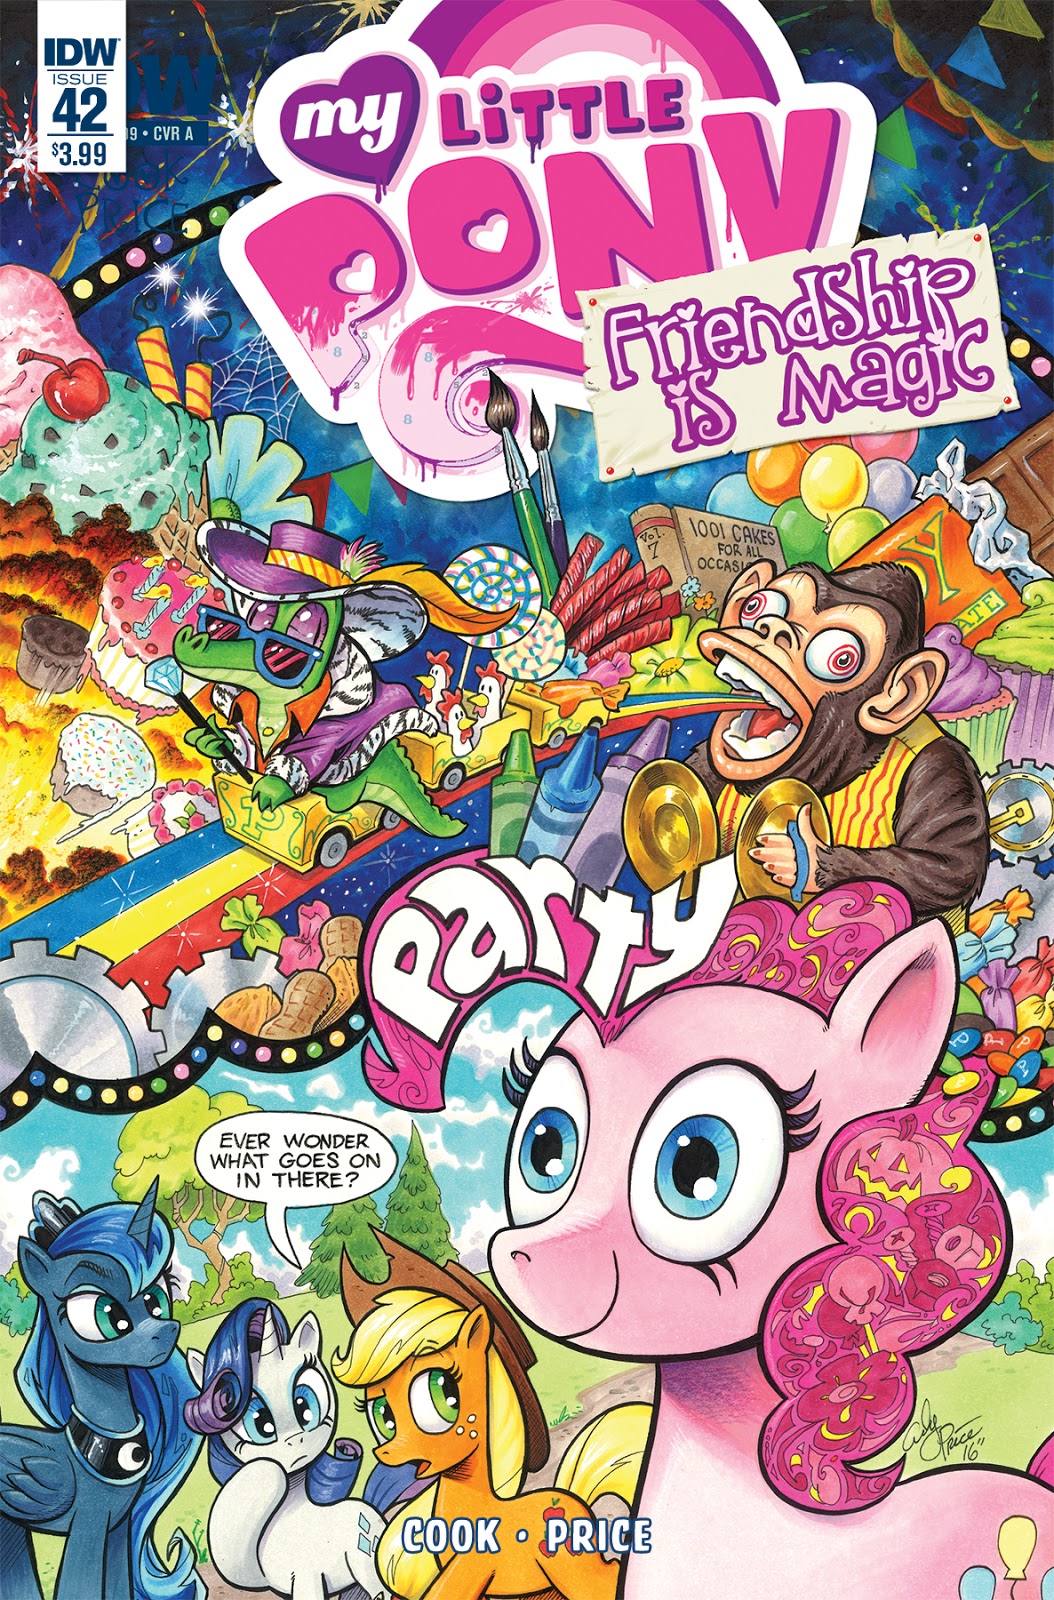 Friendship Is Magic Issue 42 My Little Pony Friendship Is Magic